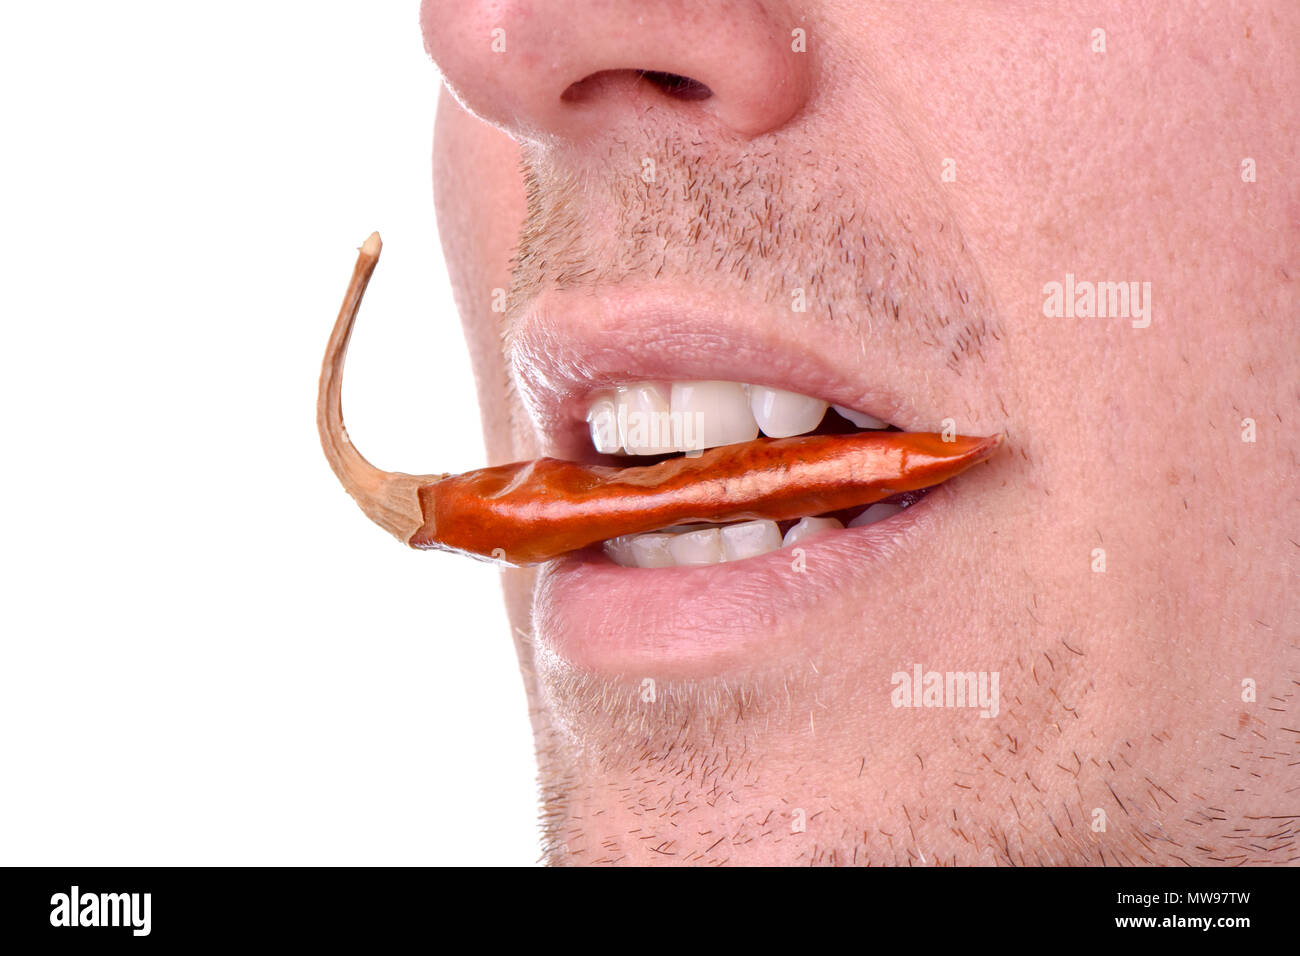 Bearded man eating a spicy red hot pepper on a white background Stock Photo